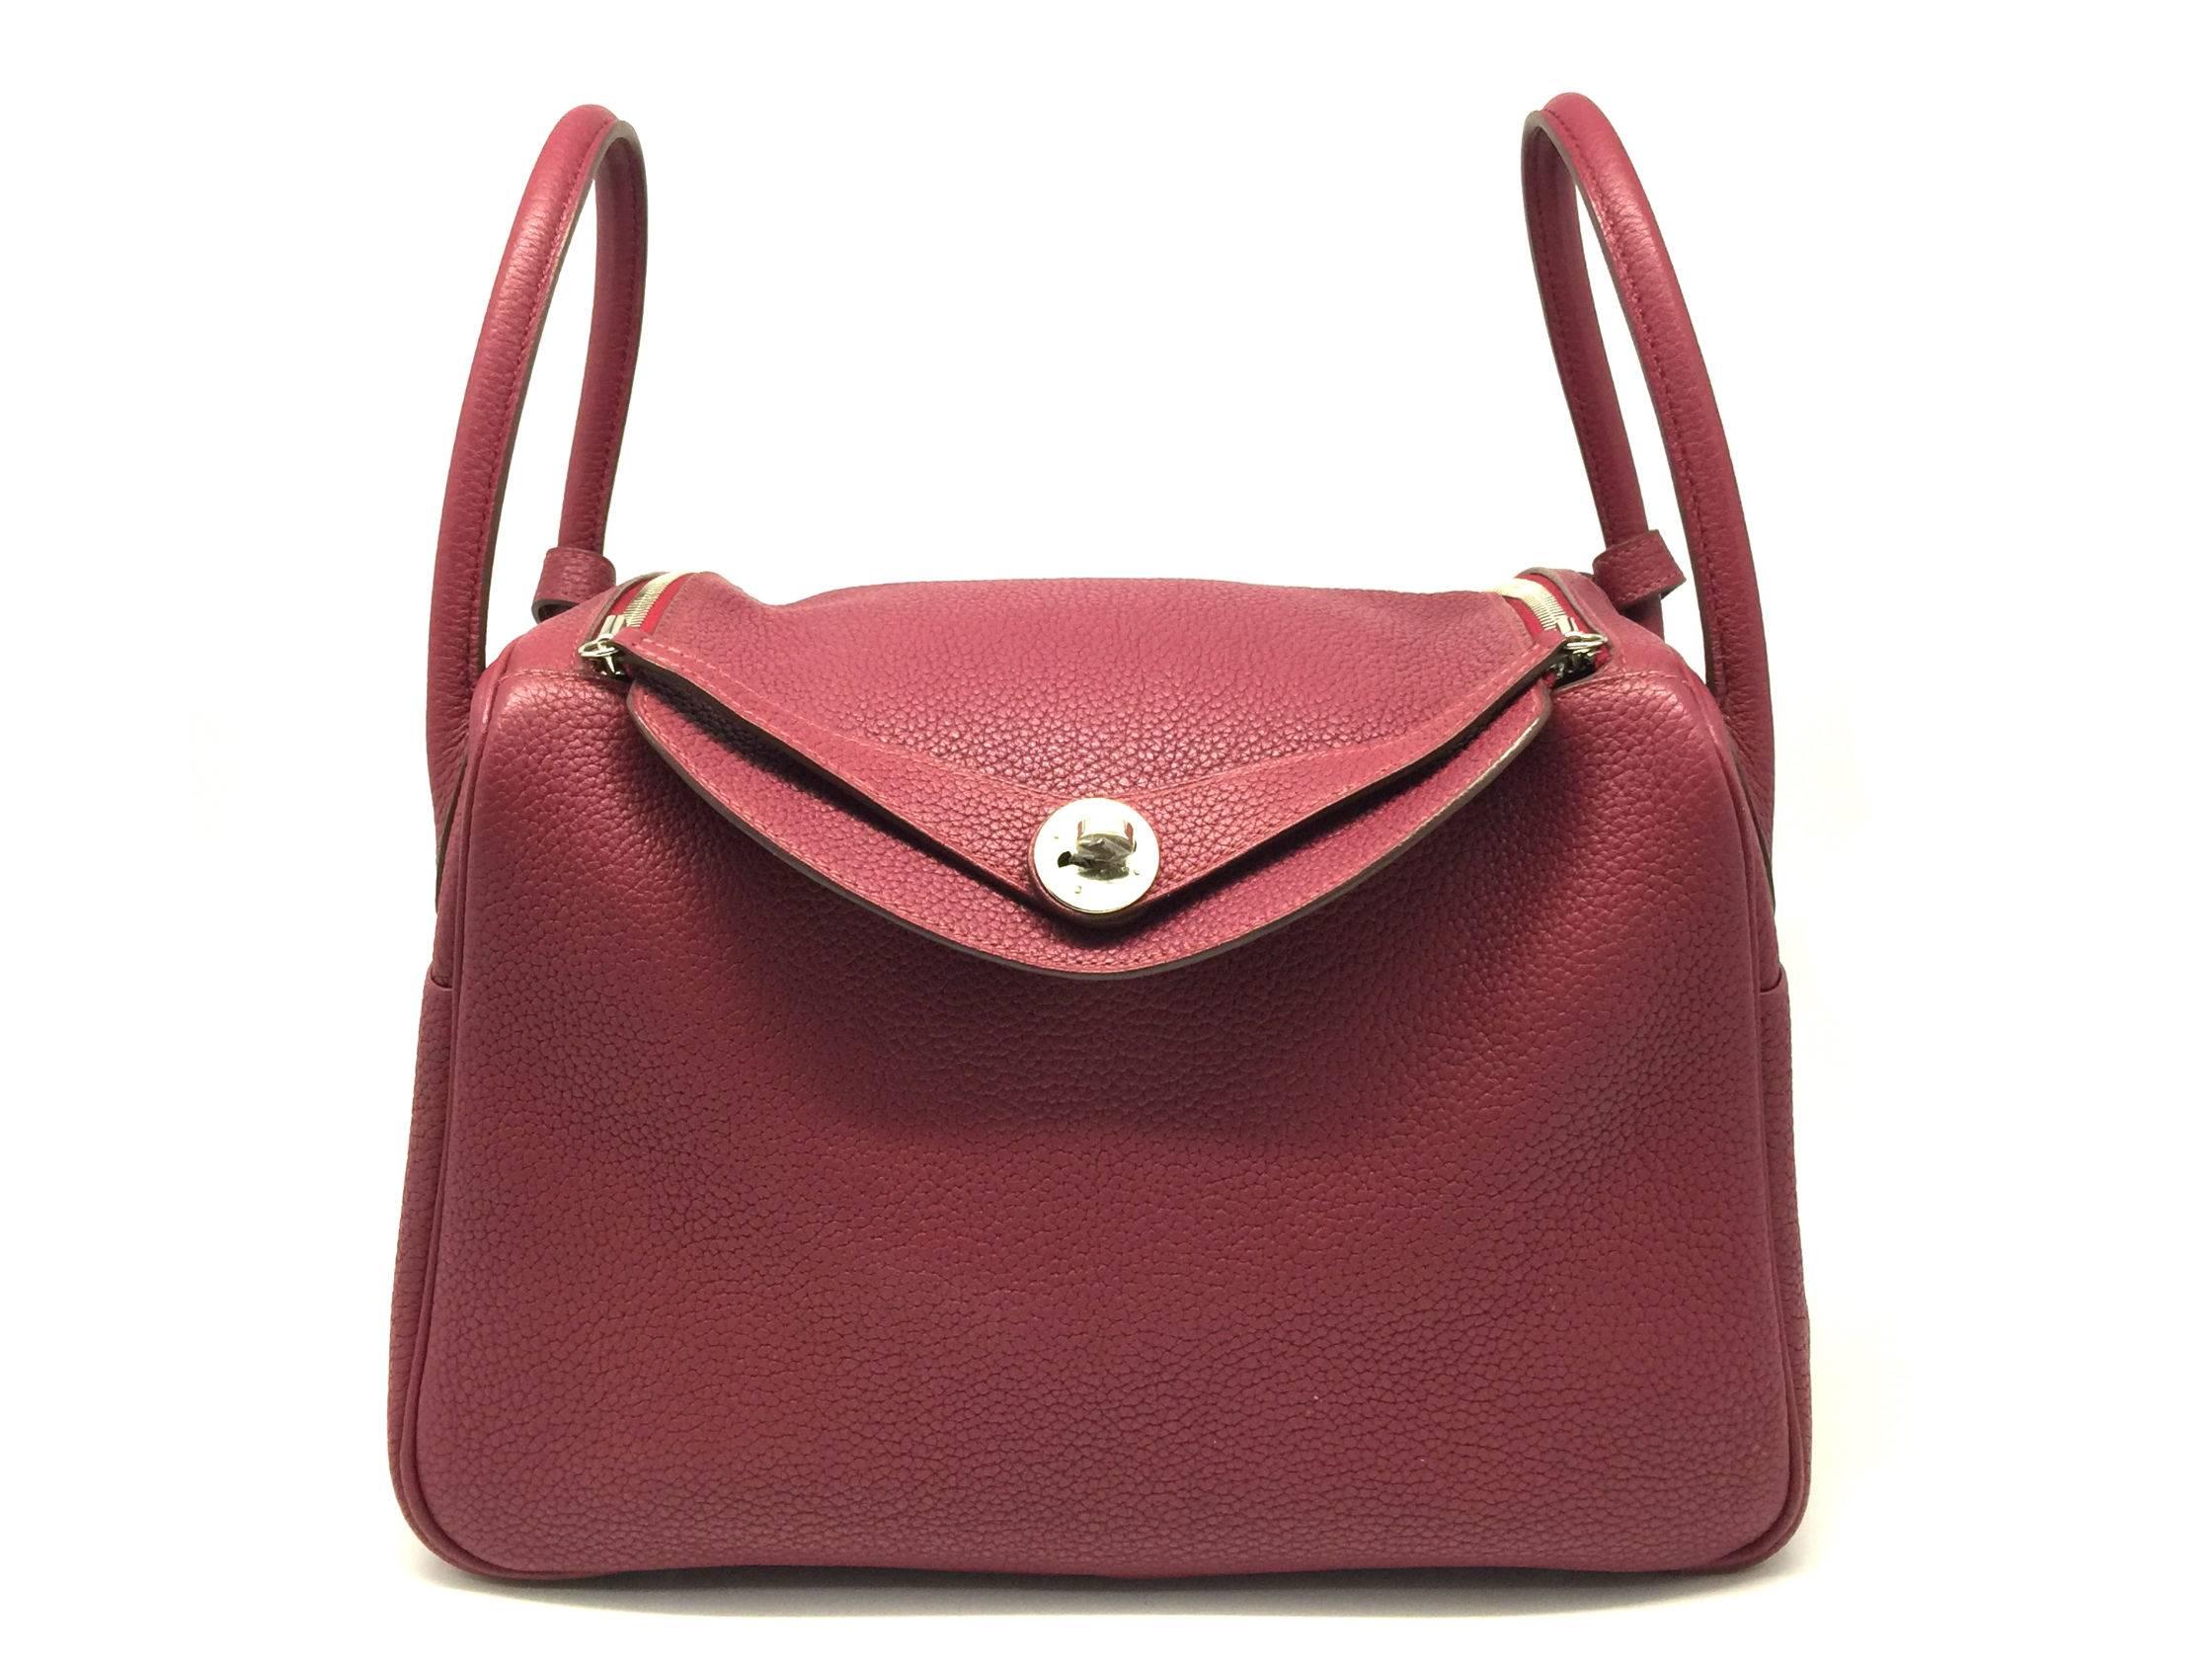 Color: Red / Rubis (designer color)
Material: Clemence Leather

Condition:
Rank A
Overall: Good, few minor defects
Surface: Good
Corners: Minor Scratches
Edges: Minor Stains
Handles/Straps: Good
Hardware: Good

Dimension:
W30 × H21 ×